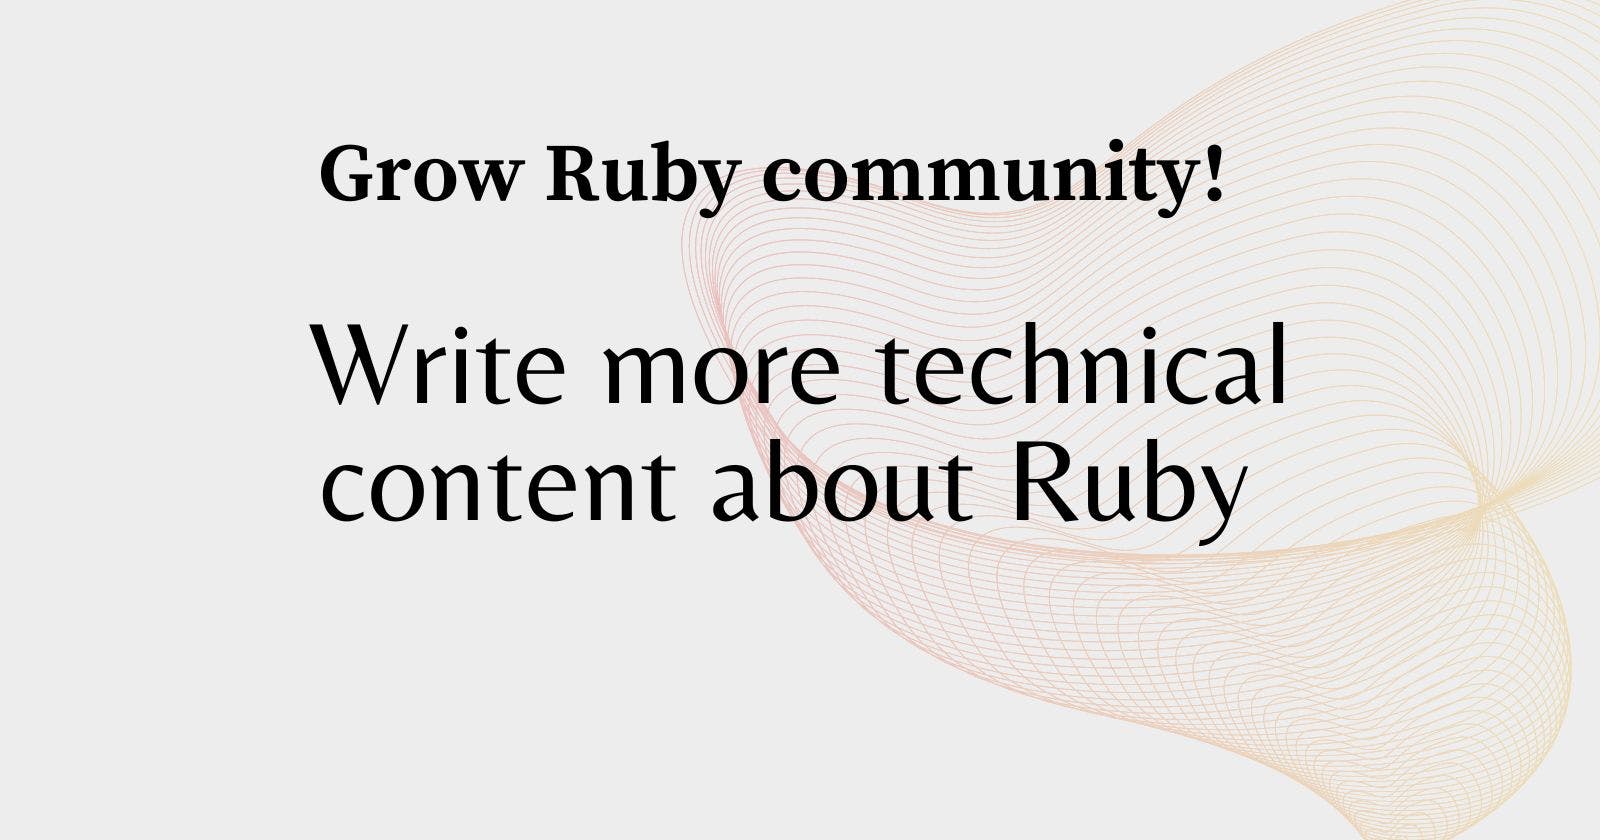 A simple idea of how to grow the Ruby community